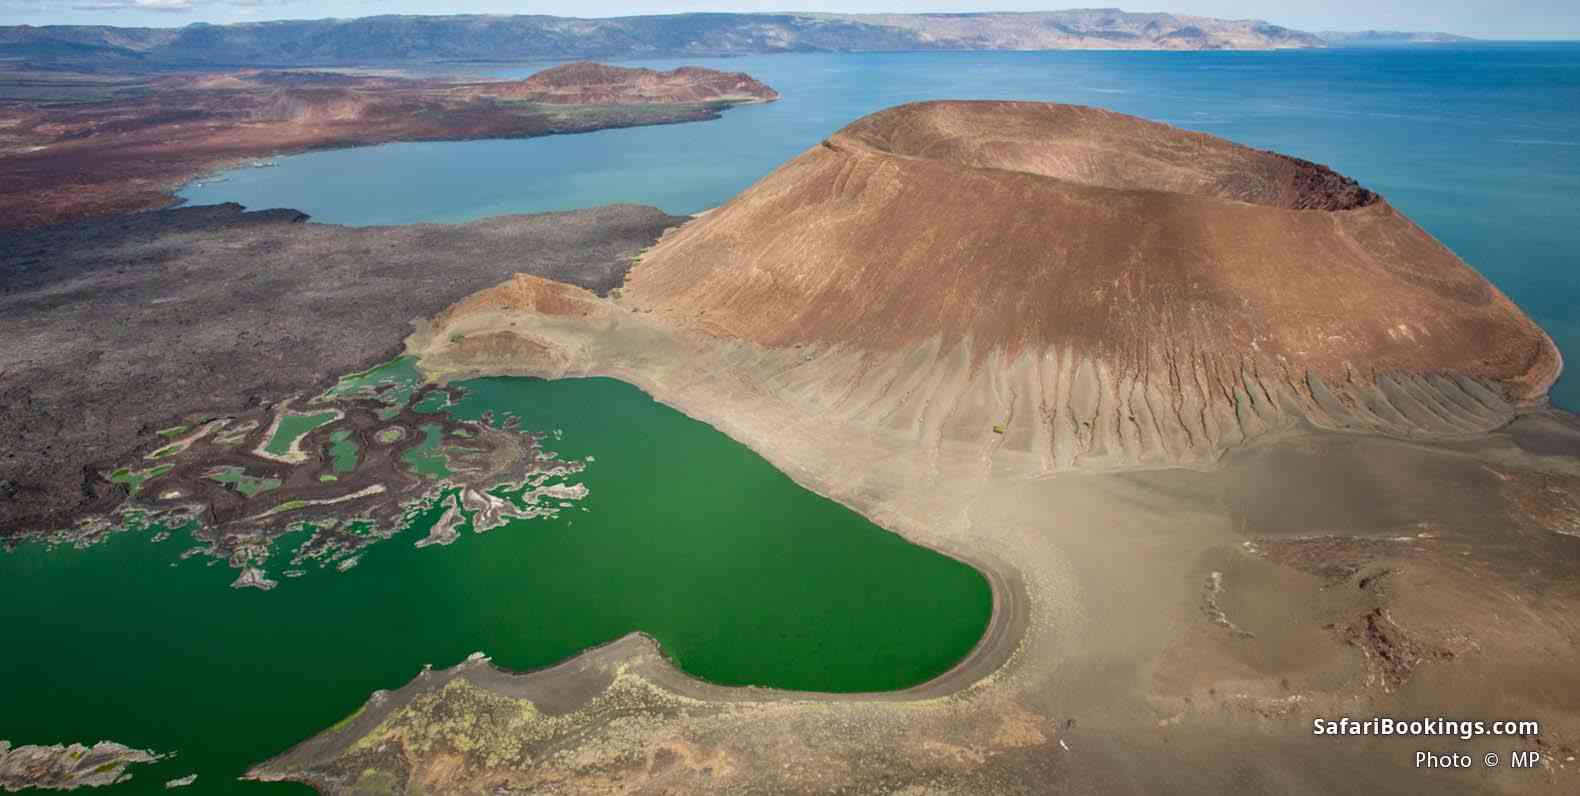 Scenic view of the Lake Turkana craters